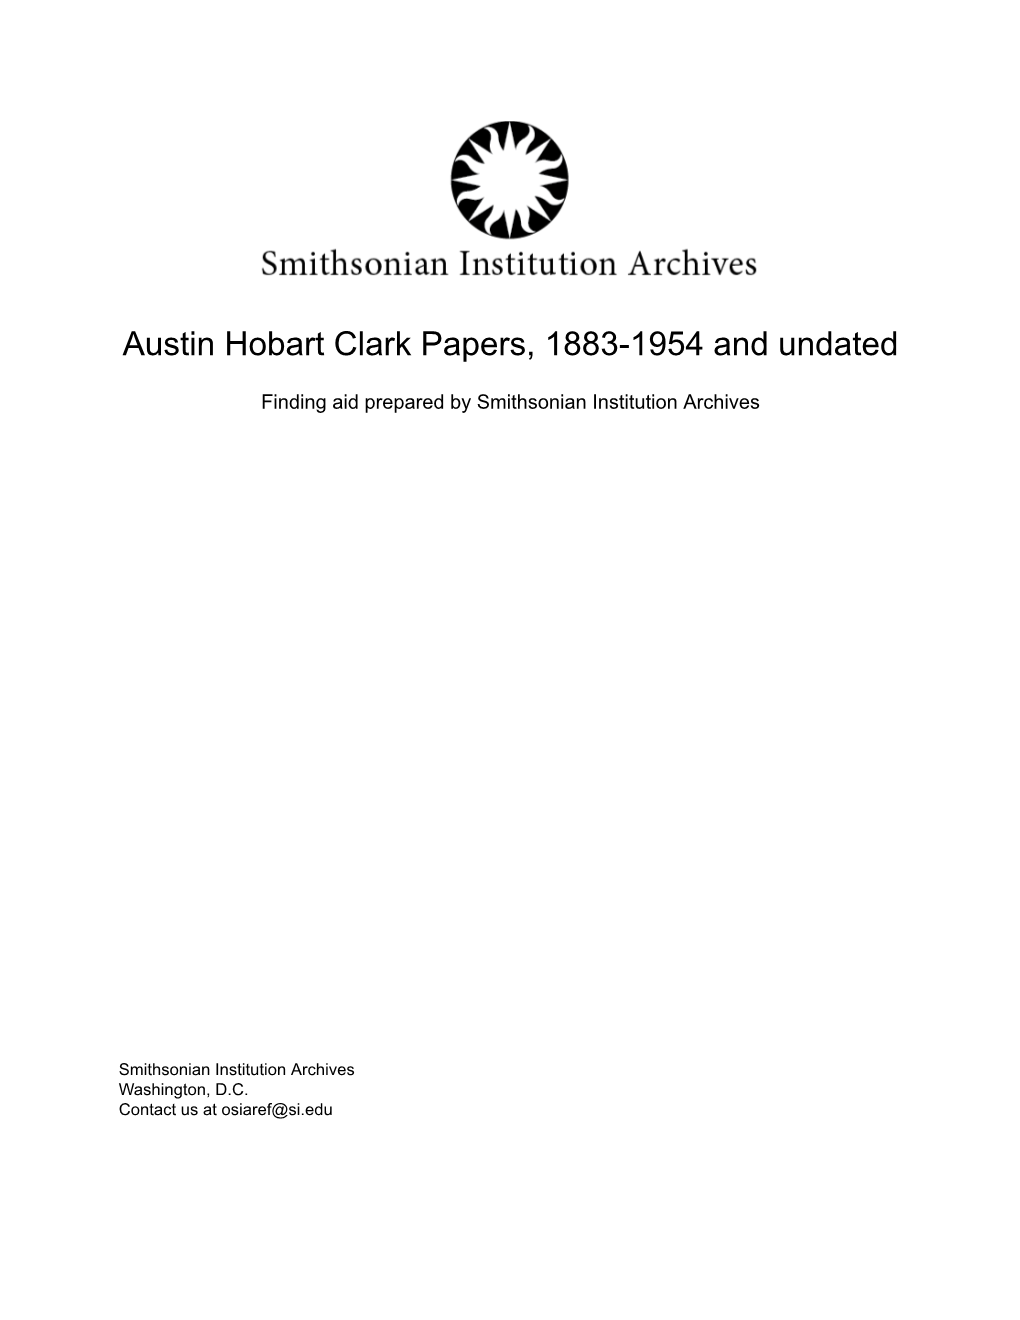 Austin Hobart Clark Papers, 1883-1954 and Undated